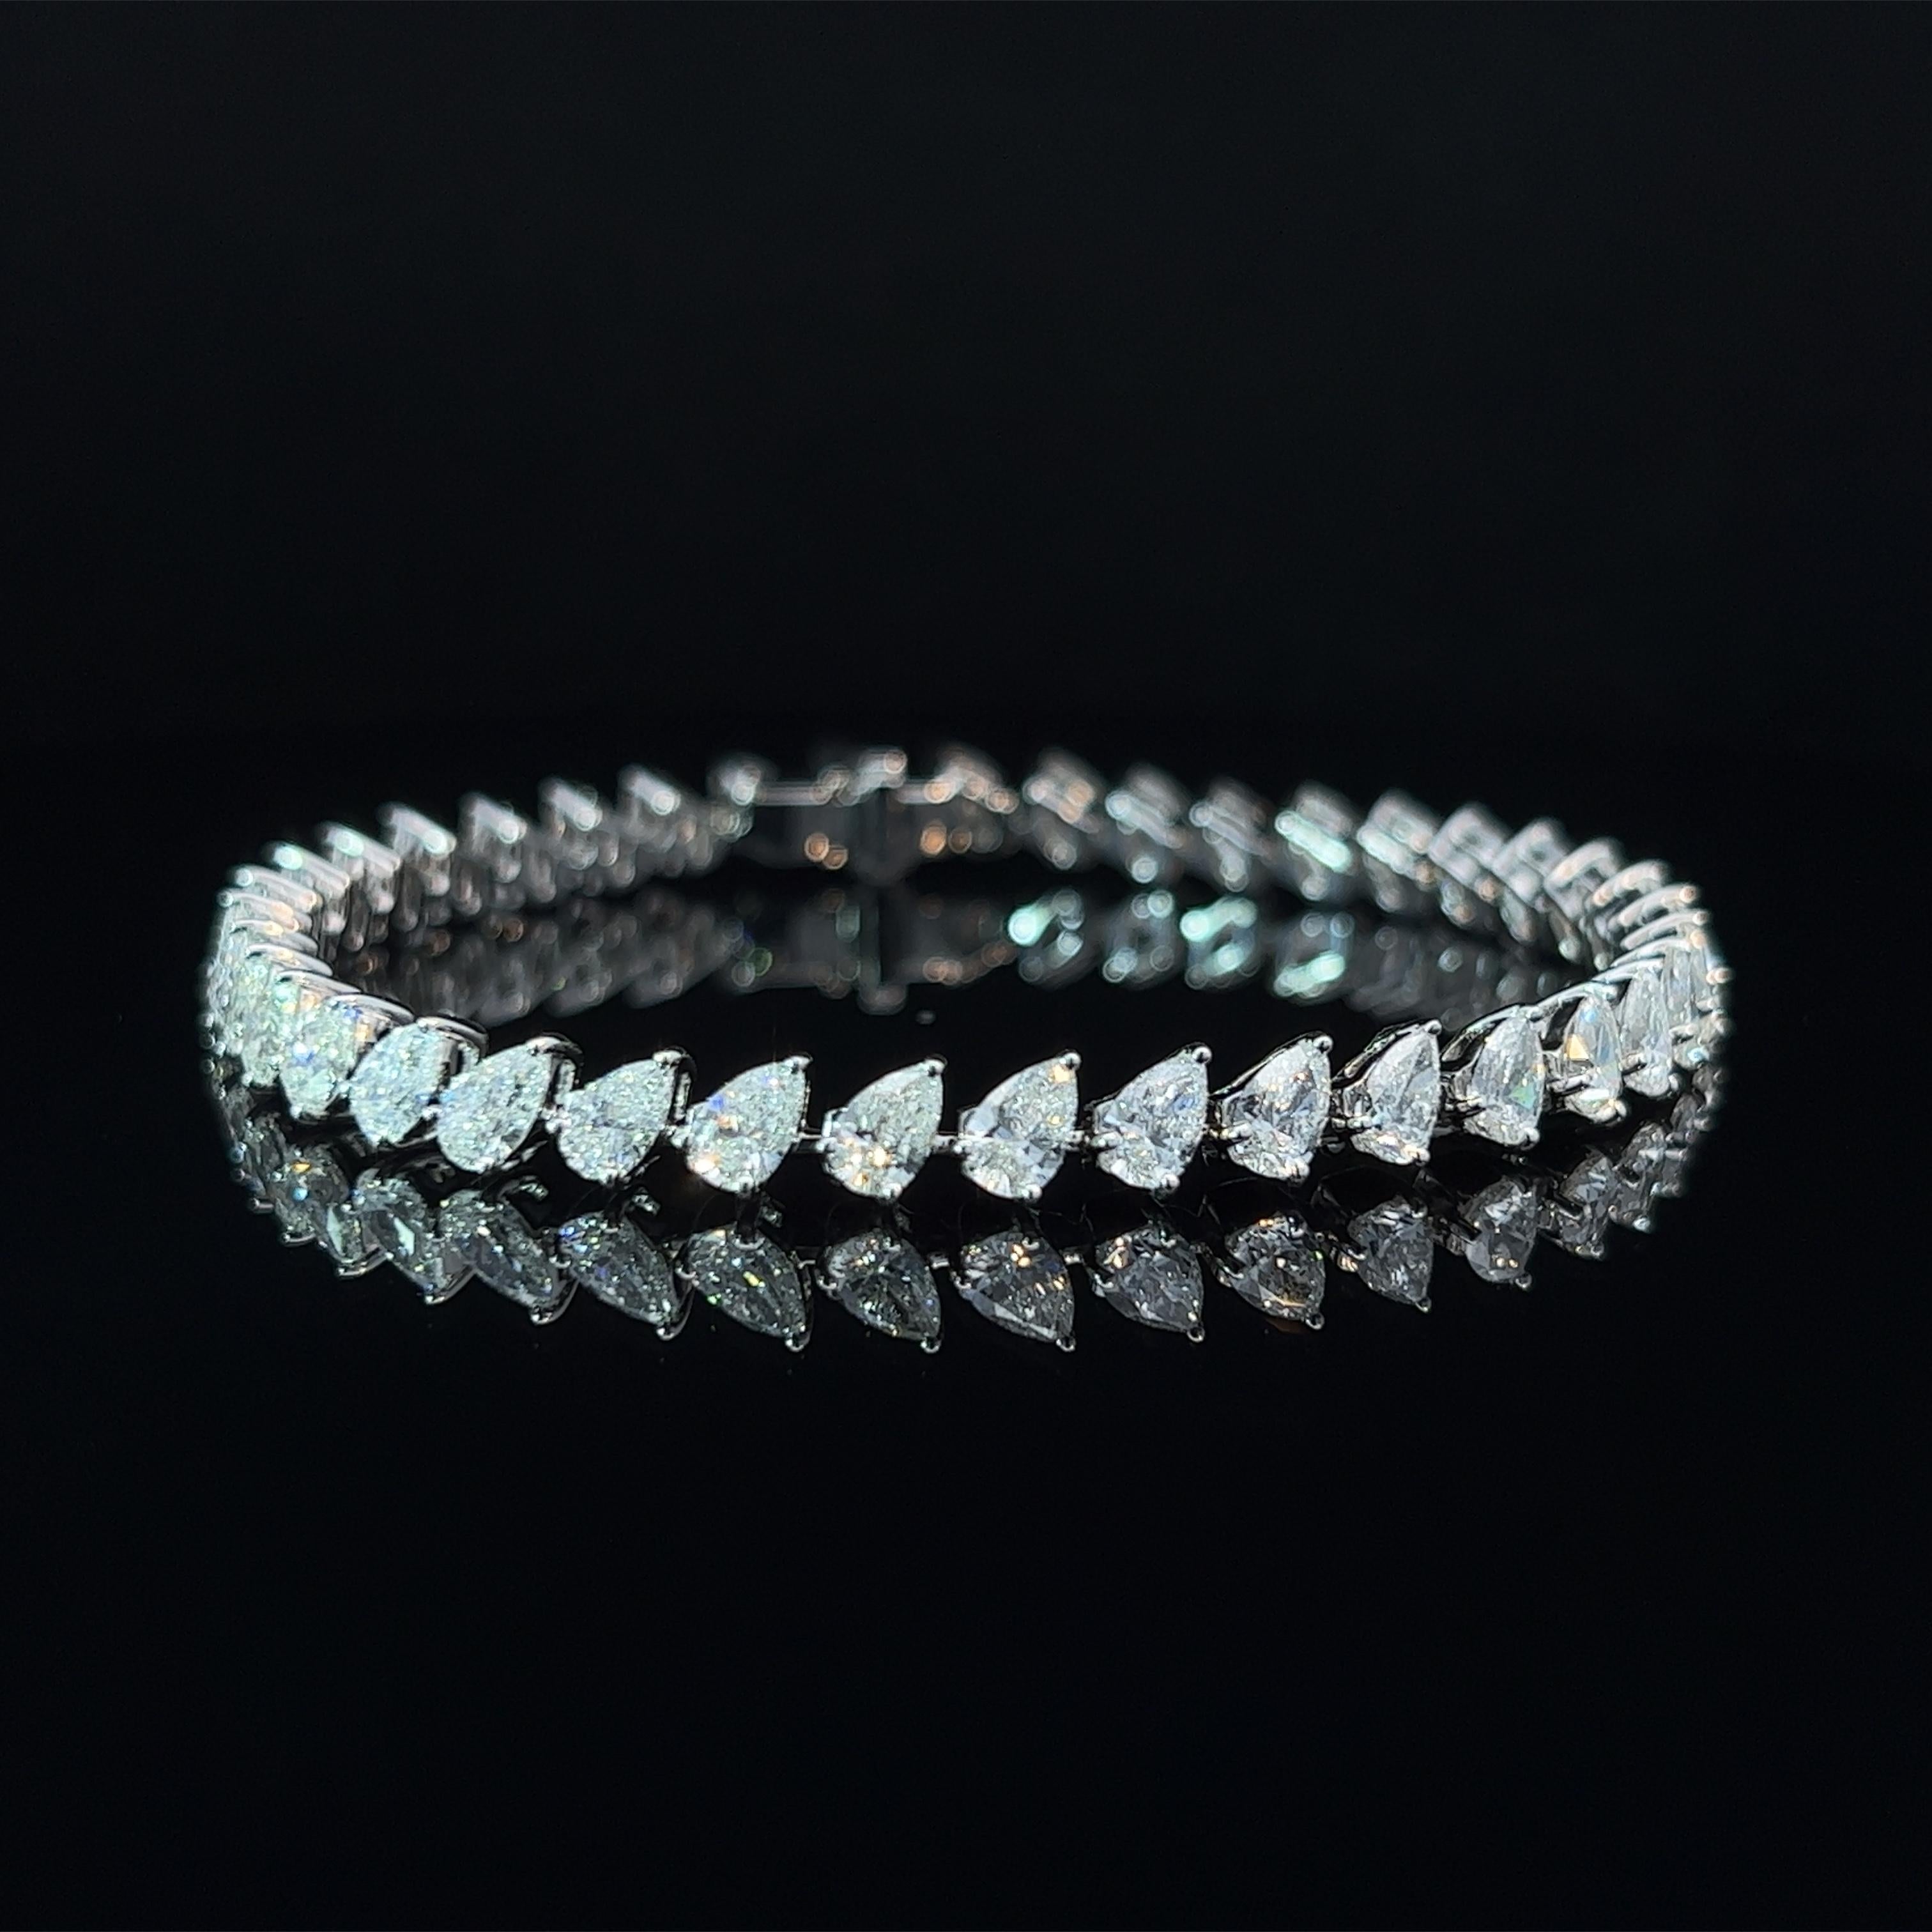 Diamond Shape: Pear Cut  
Total Diamond Weight: 9.45ct
Individual Diamond Weight: .25ct
Color/Clarity: FG VS  
Metal: 18K White Gold 
Metal Weight: 13.58g

Key Features:

Pear-Cut Diamonds: The centerpiece of this bracelet consists of a series of